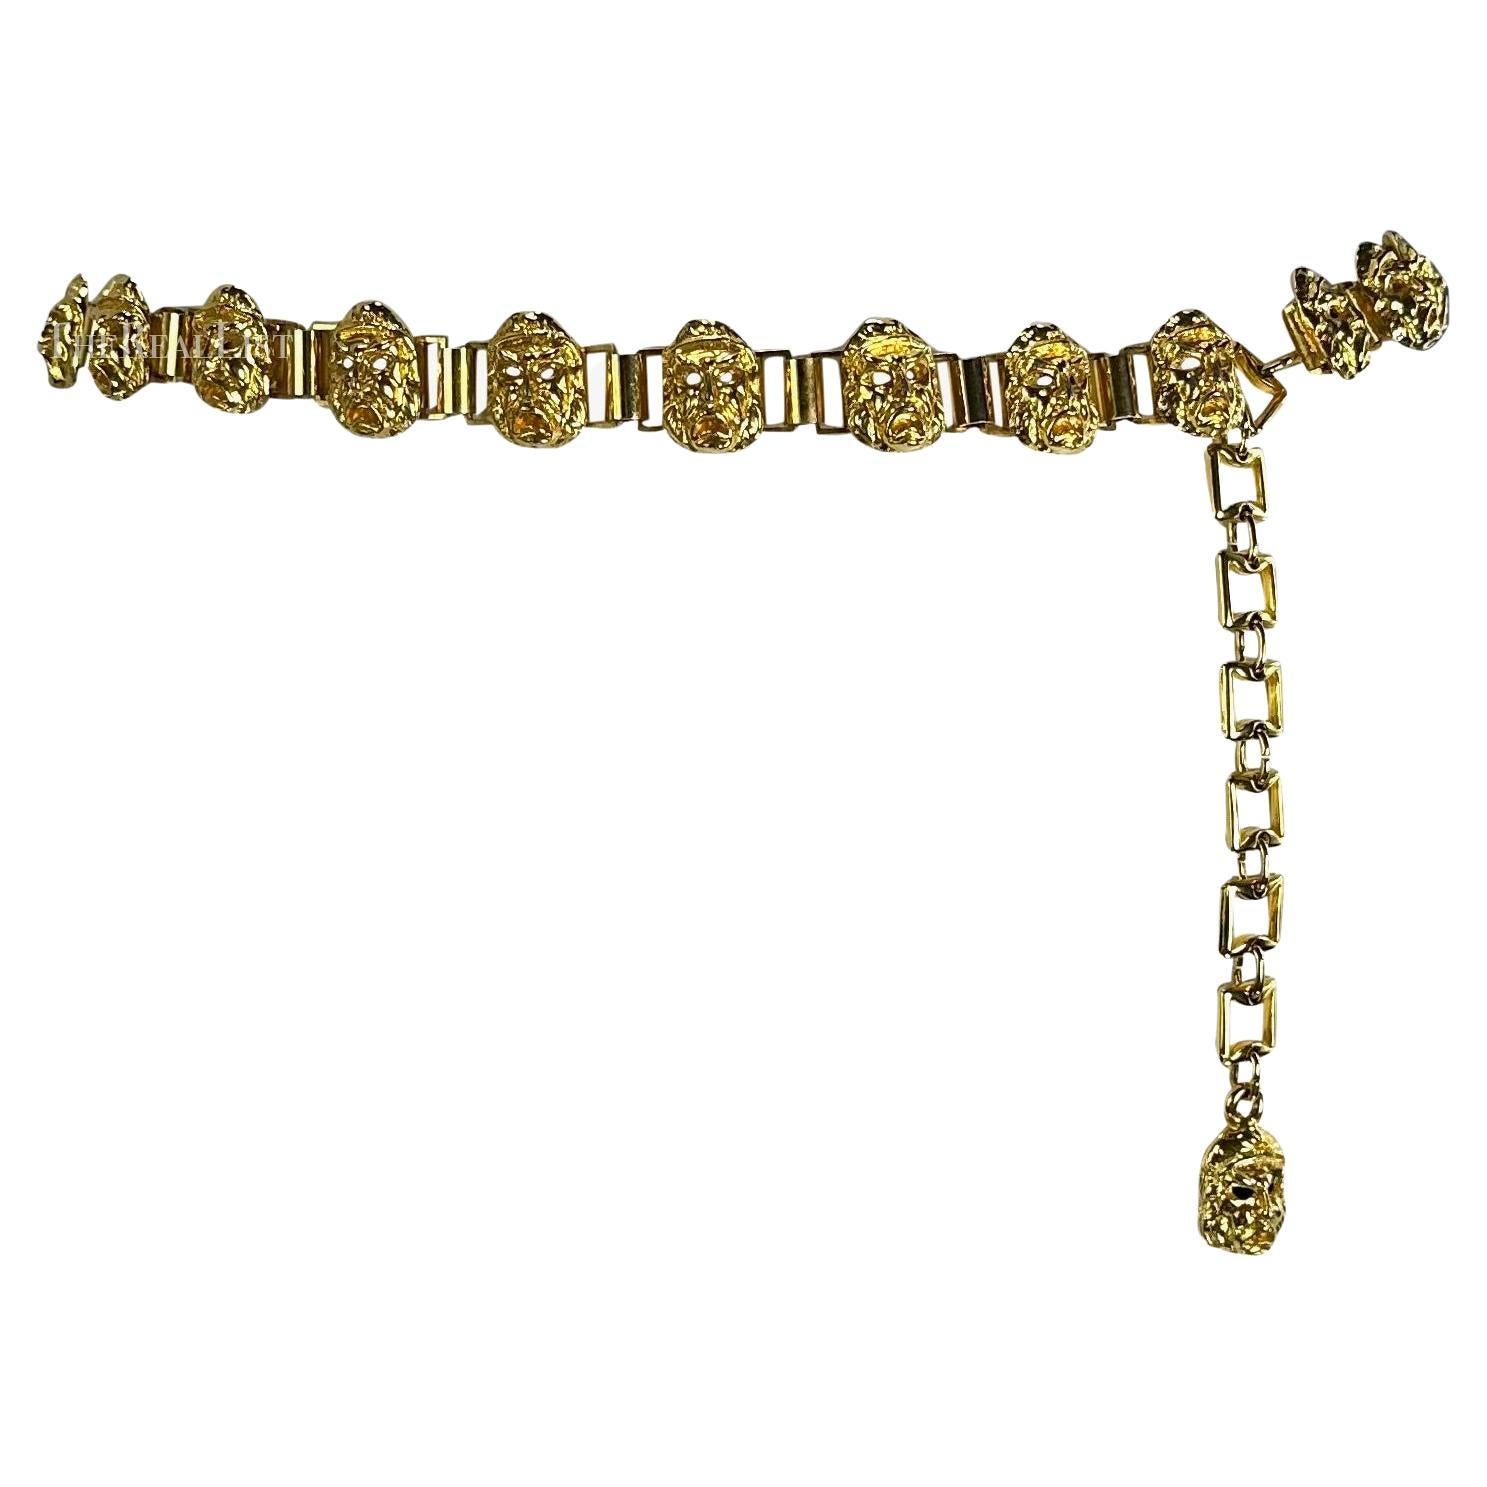 S/S 1992 Gianni Versace Gold Tone Roman Mask Chain Belt  For Sale